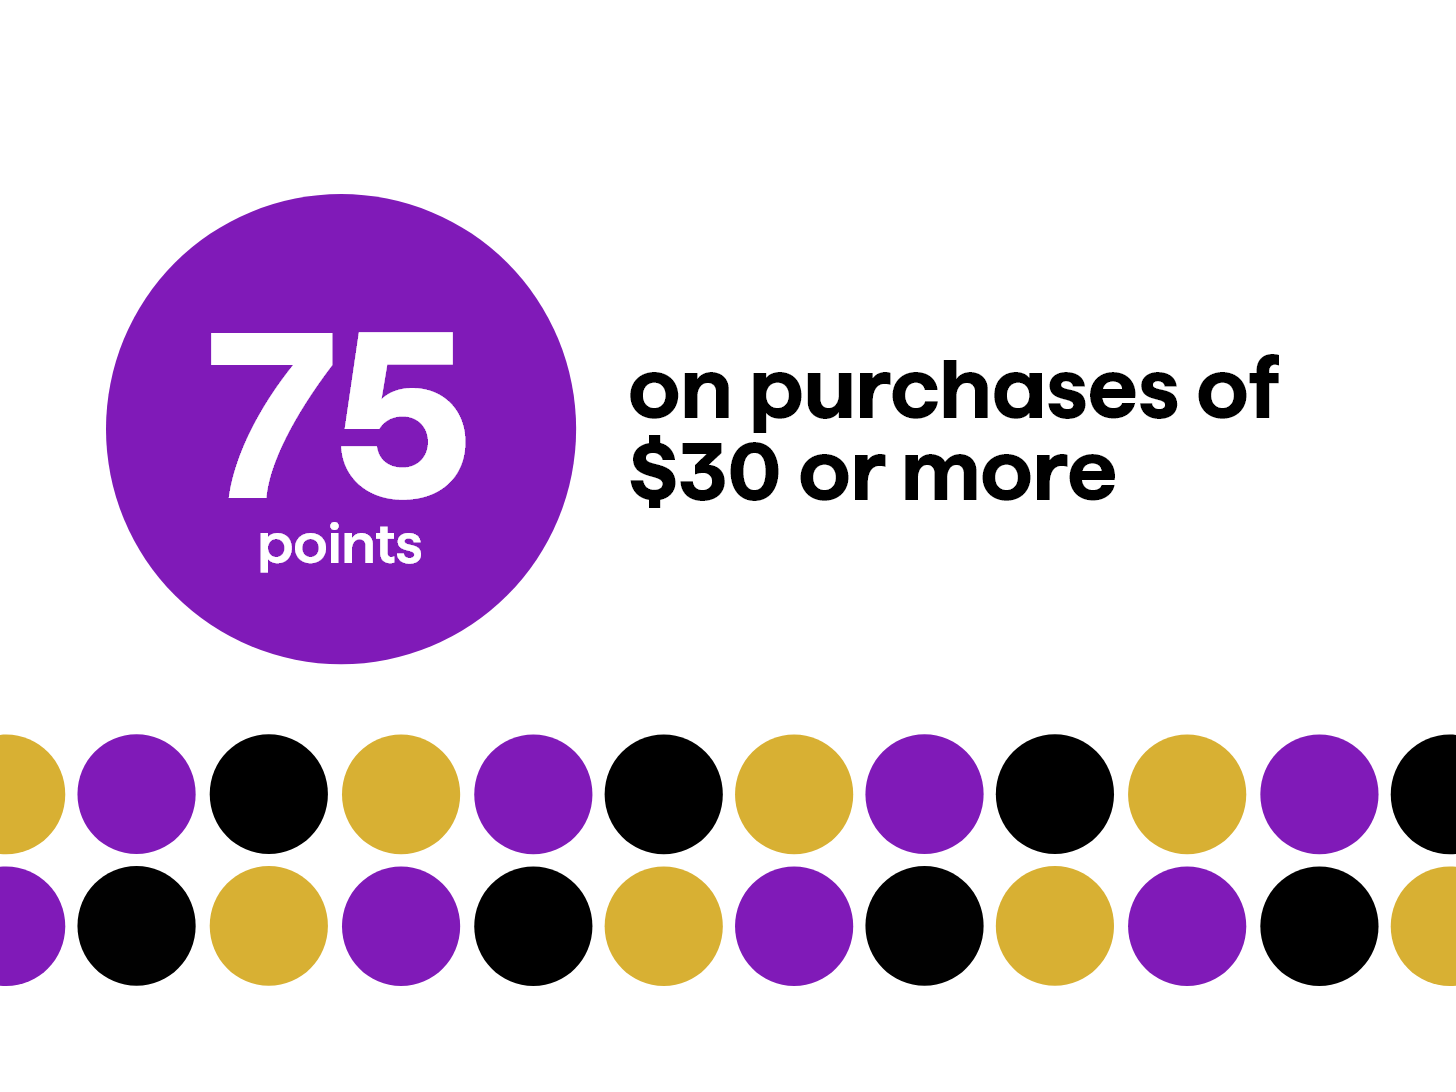 75 points on purchases of $30 or more